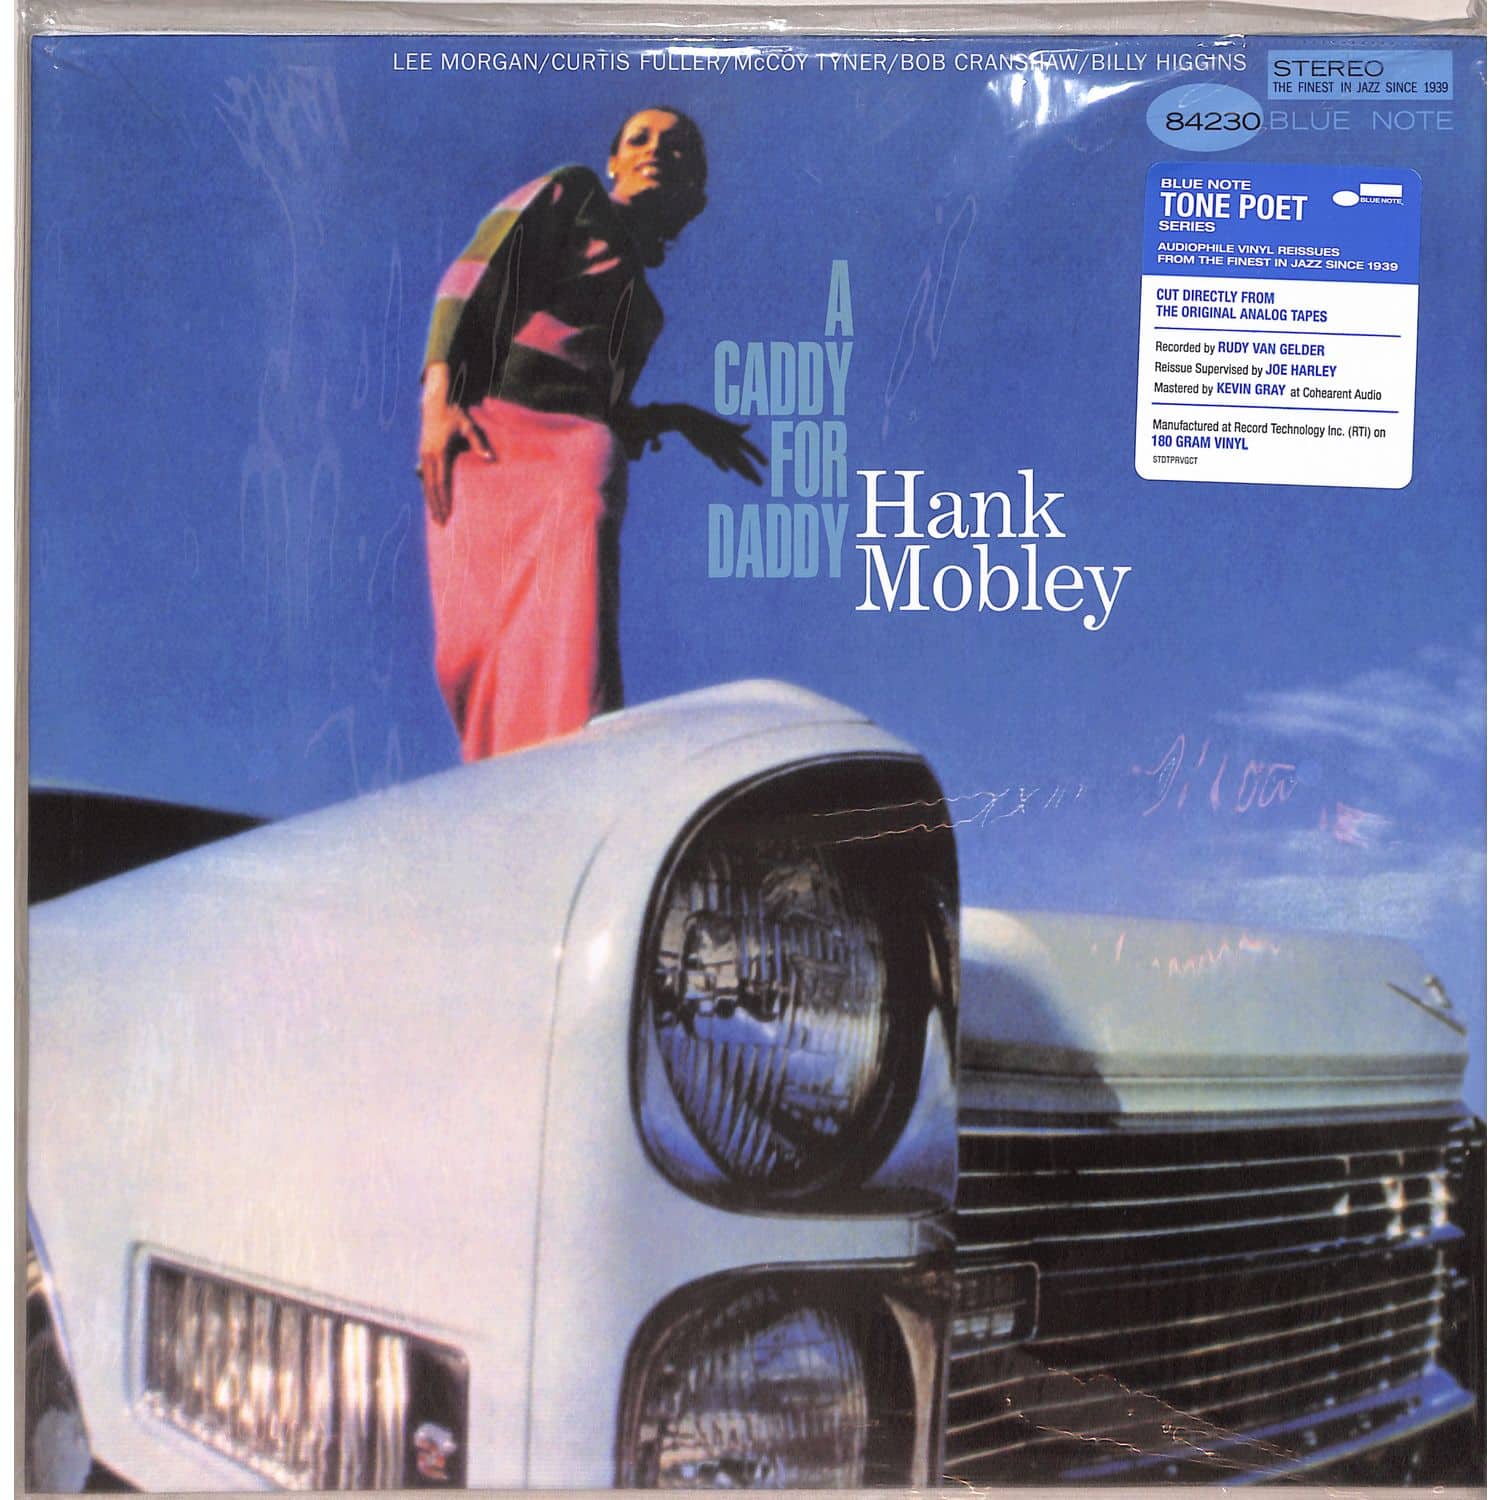  Hank Mobley - A CADDY FOR DADDY 